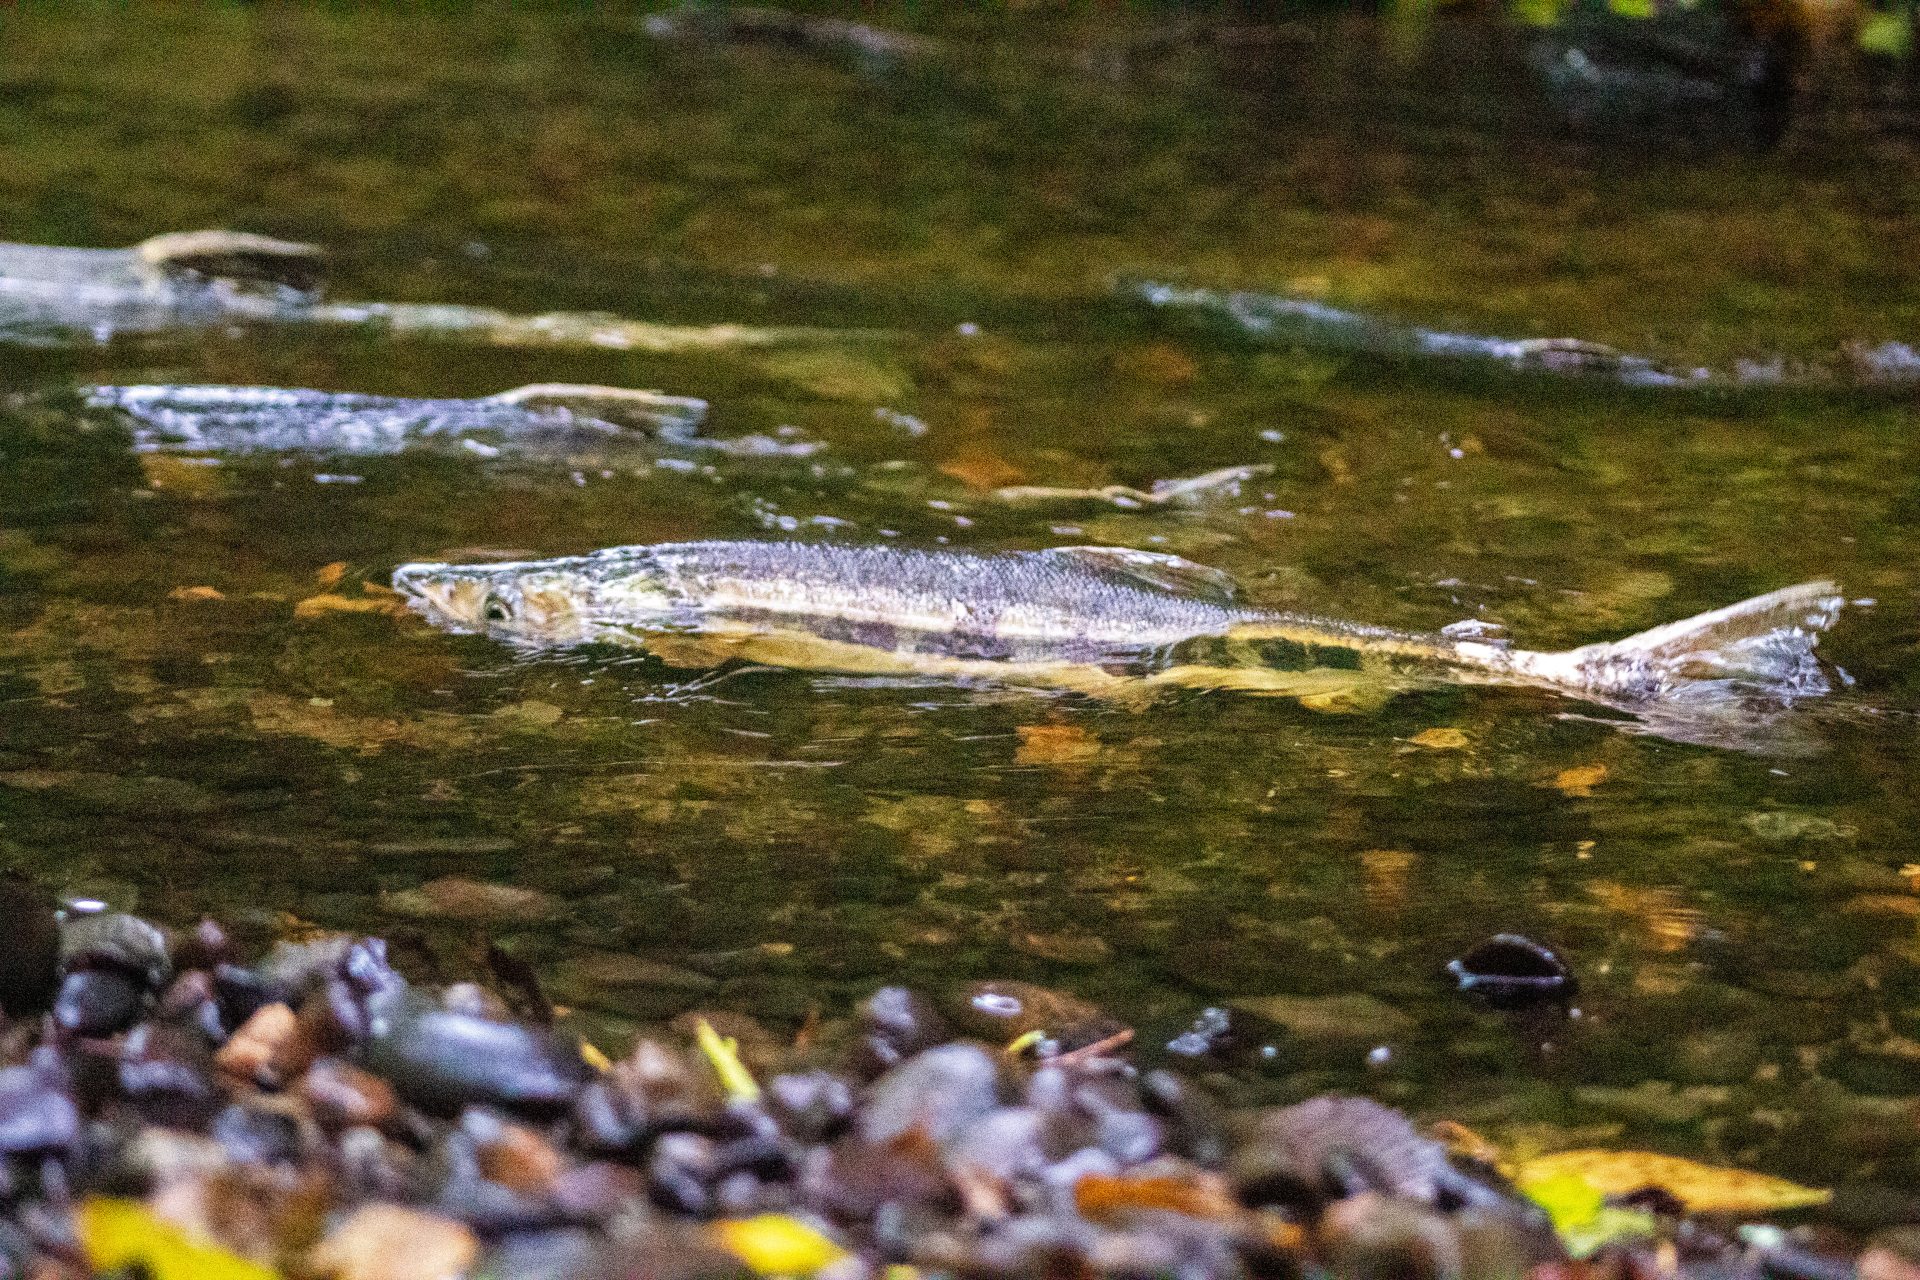 Salmon Recovery is working, but we can’t stop here